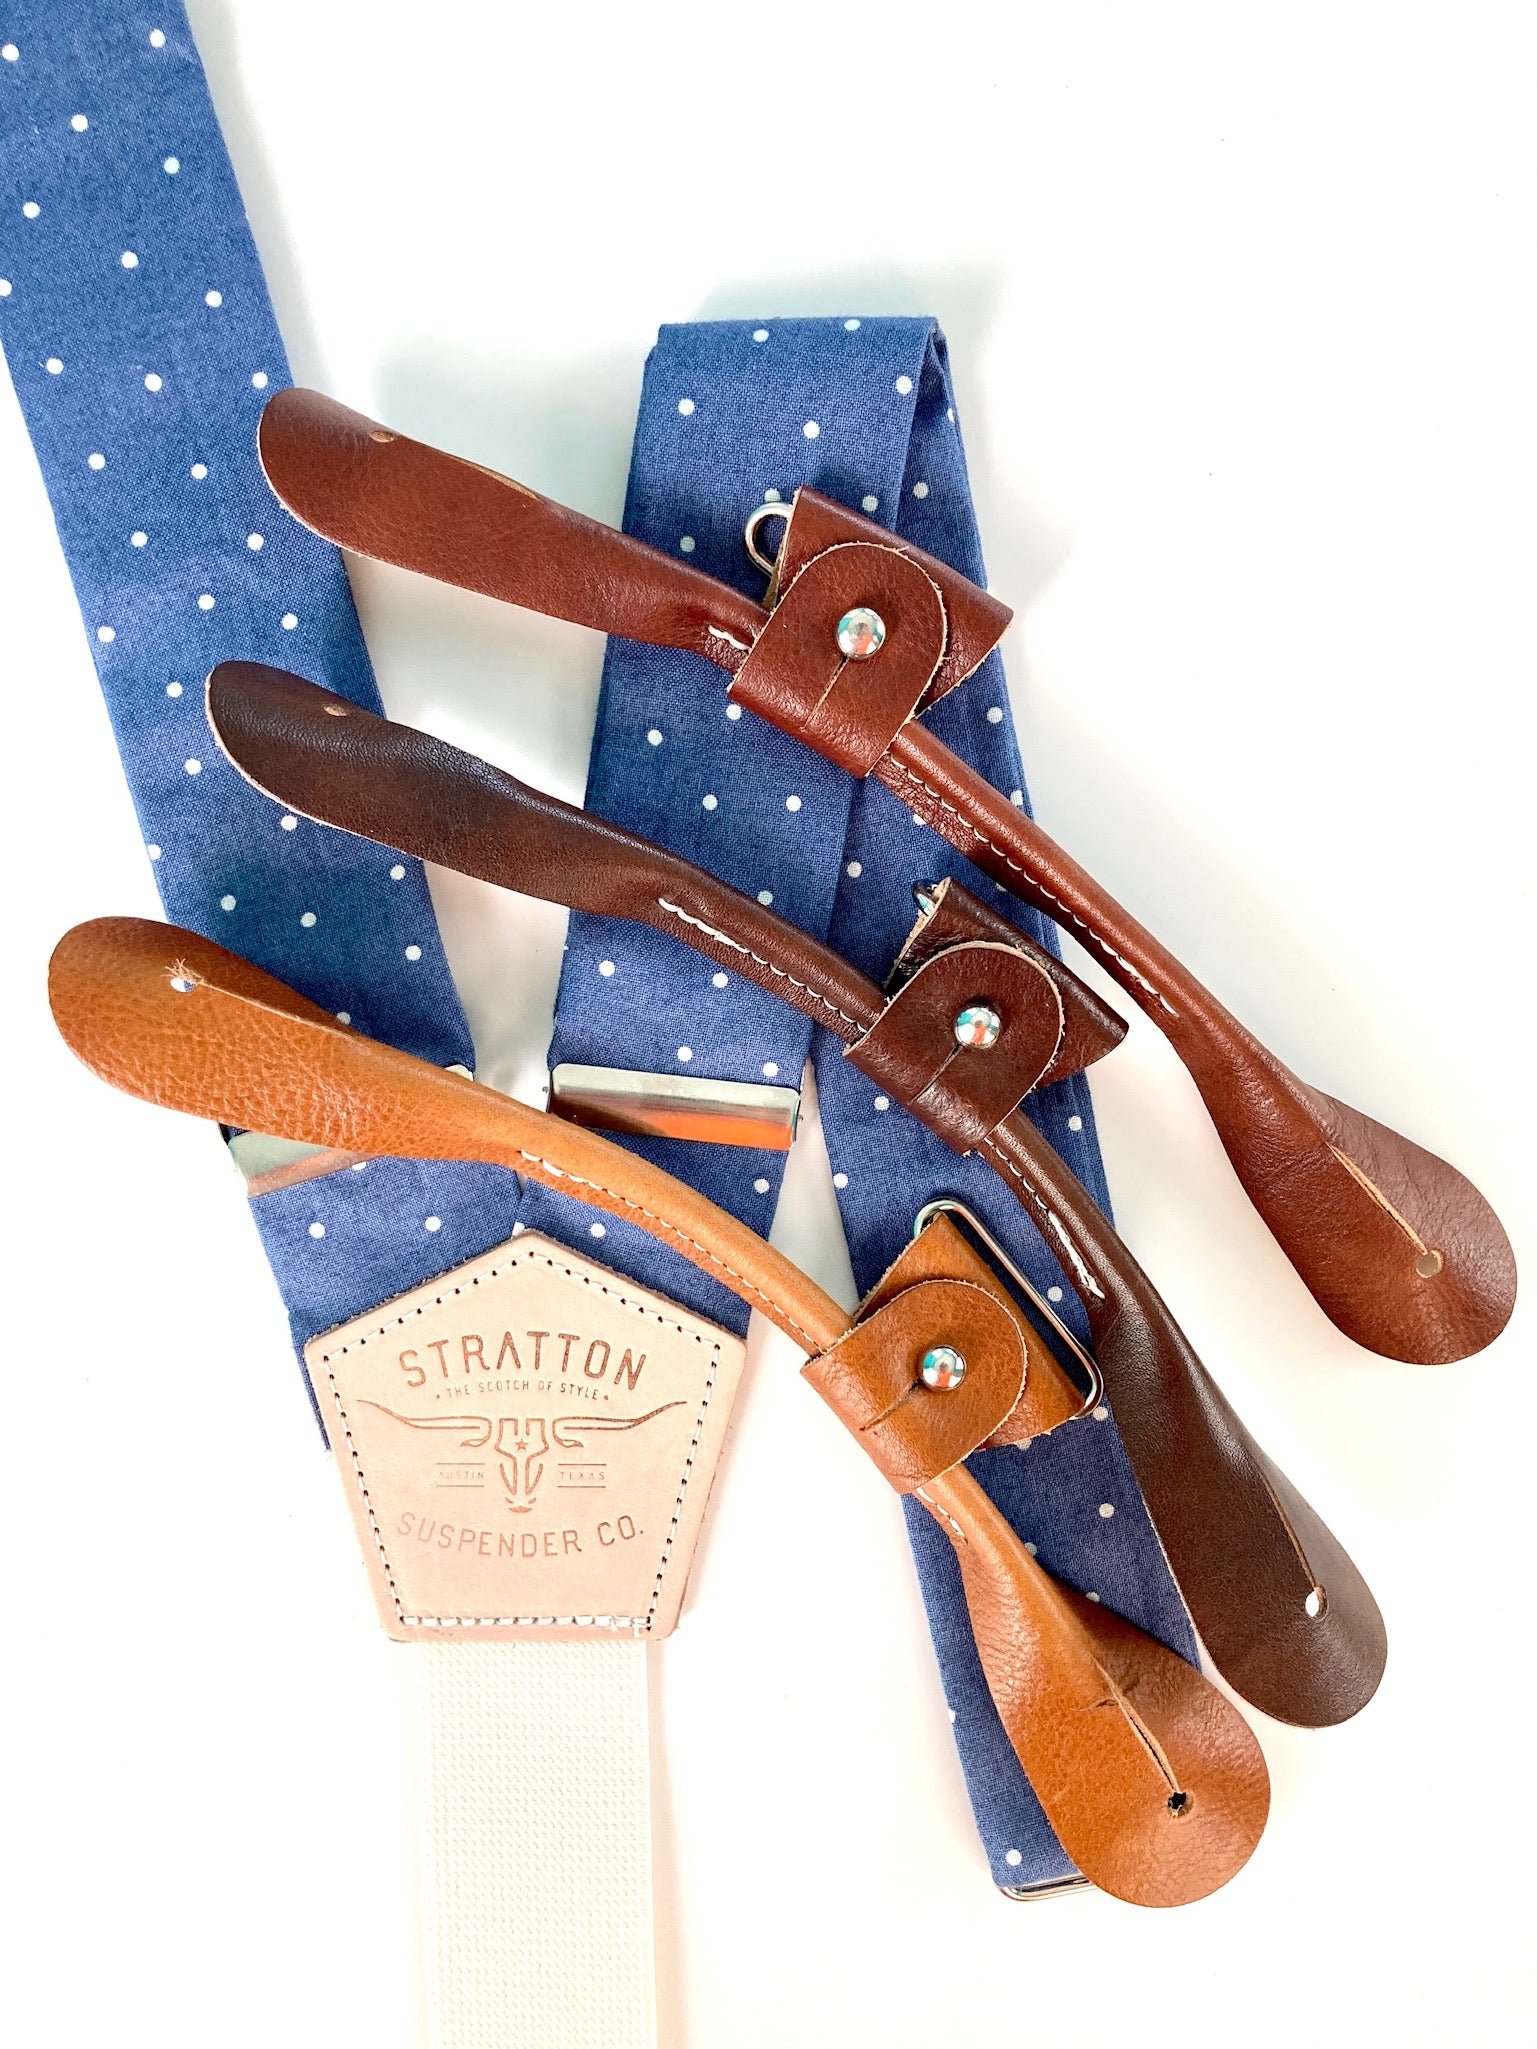 Stratton Suspender Co. Button On Set in Vintage Blue Polka Dot featuring Tan, Cognac, and Chocolate Italian Pontedero Leather